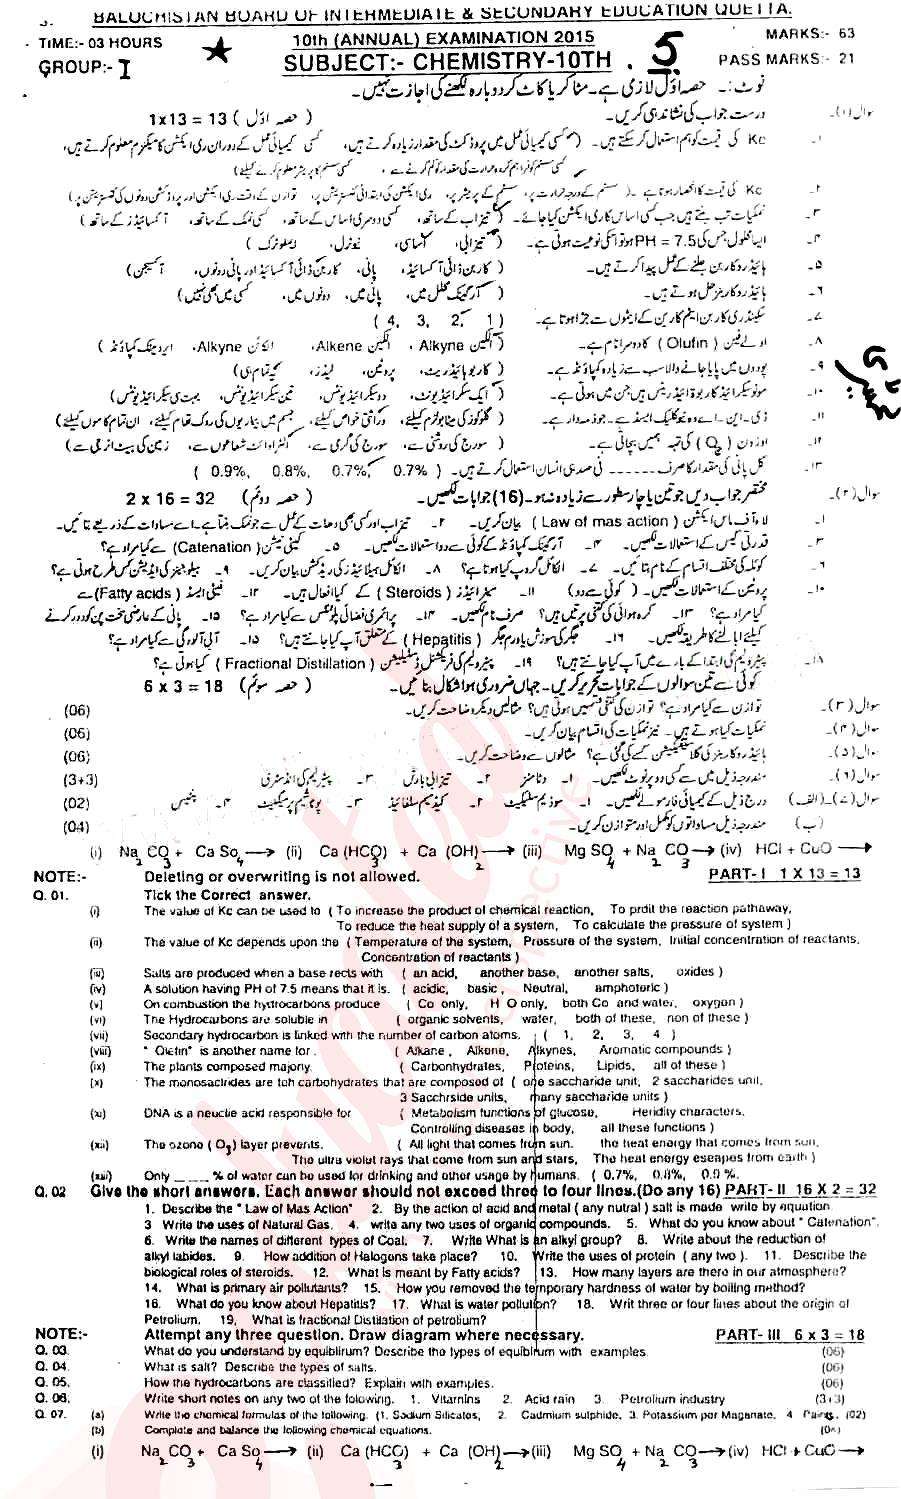 Chemistry 10th class Past Paper Group 1 BISE Quetta 2015